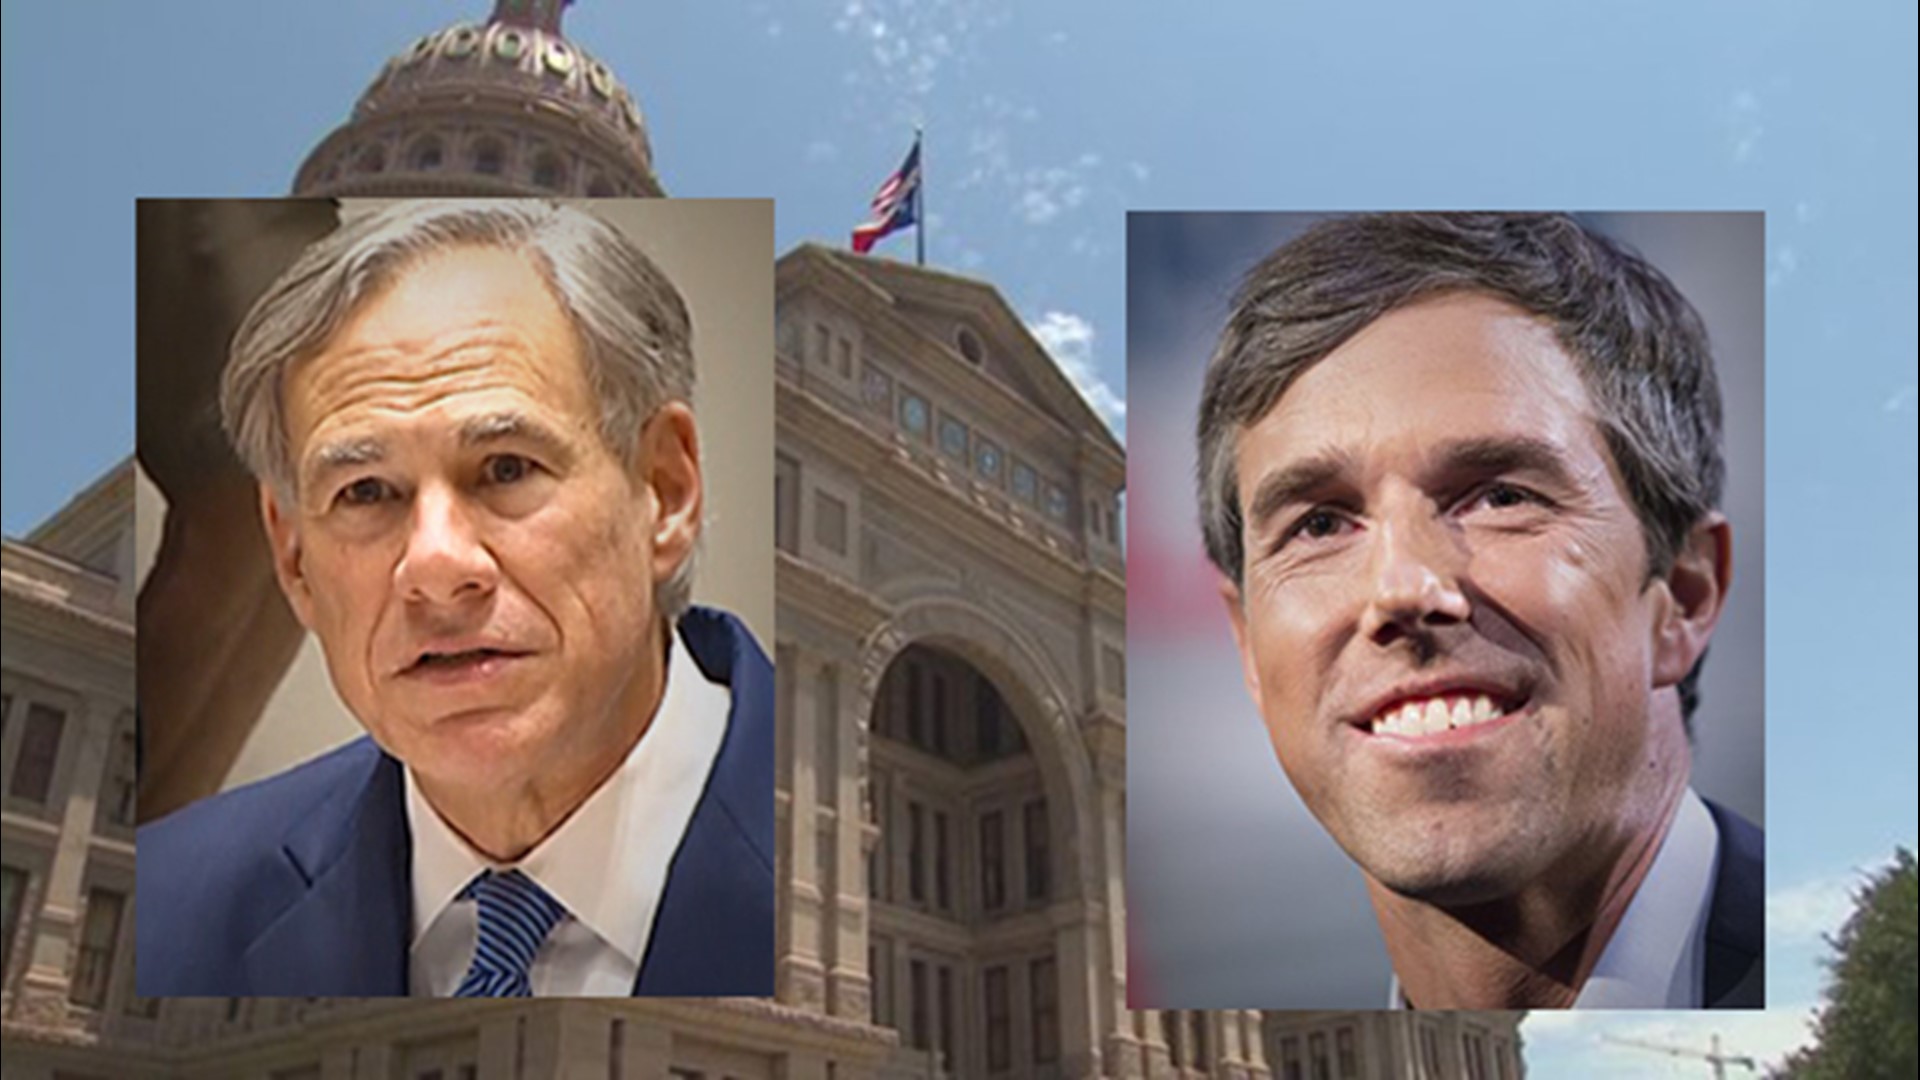 Abbott collected endorsements from law enforcement officers across the state and traded jabs with O'Rourke over police funding and bail reform.